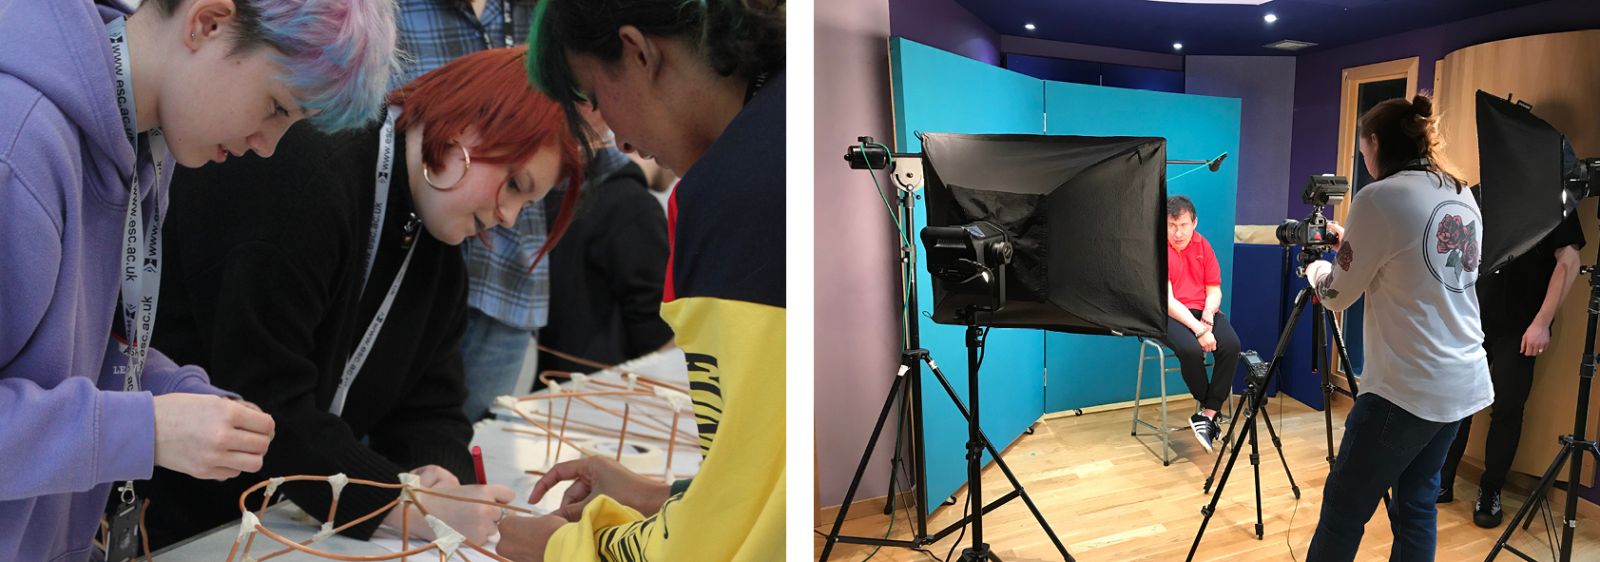 Students working + person being photographed in Photography studio